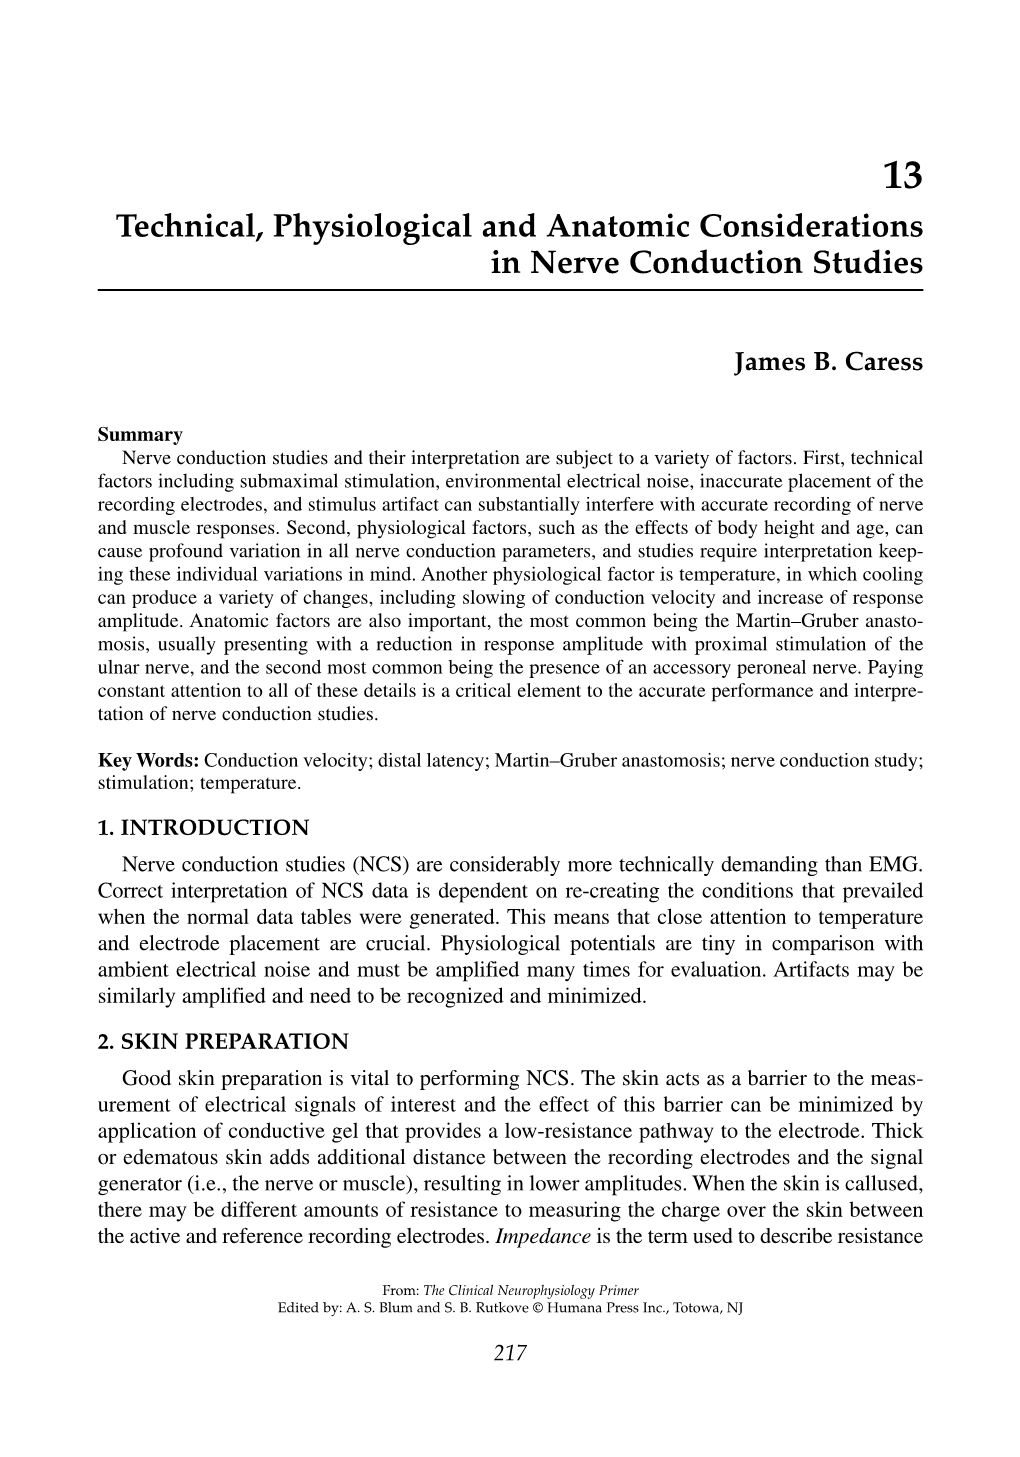 Technical, Physiological and Anatomic Considerations in Nerve Conduction Studies